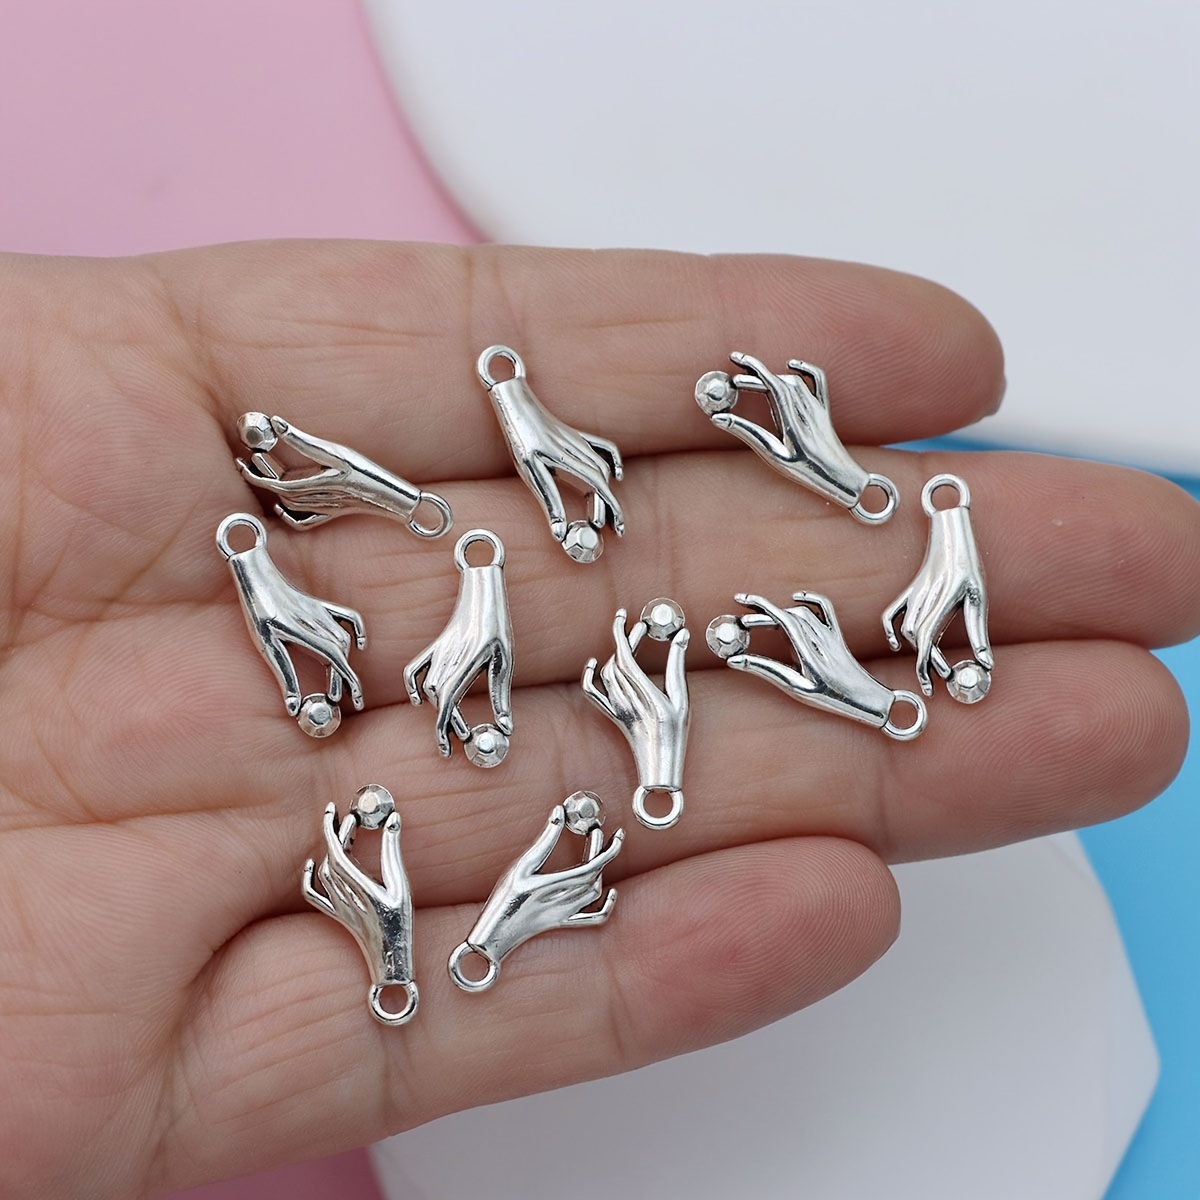 10pcs Antique Silver Color Wing Alloy Pendant Vintage Dragon Wings Heart  Shape Charms Bulk For DIY Bracelet Necklace Jewelry Making Findings